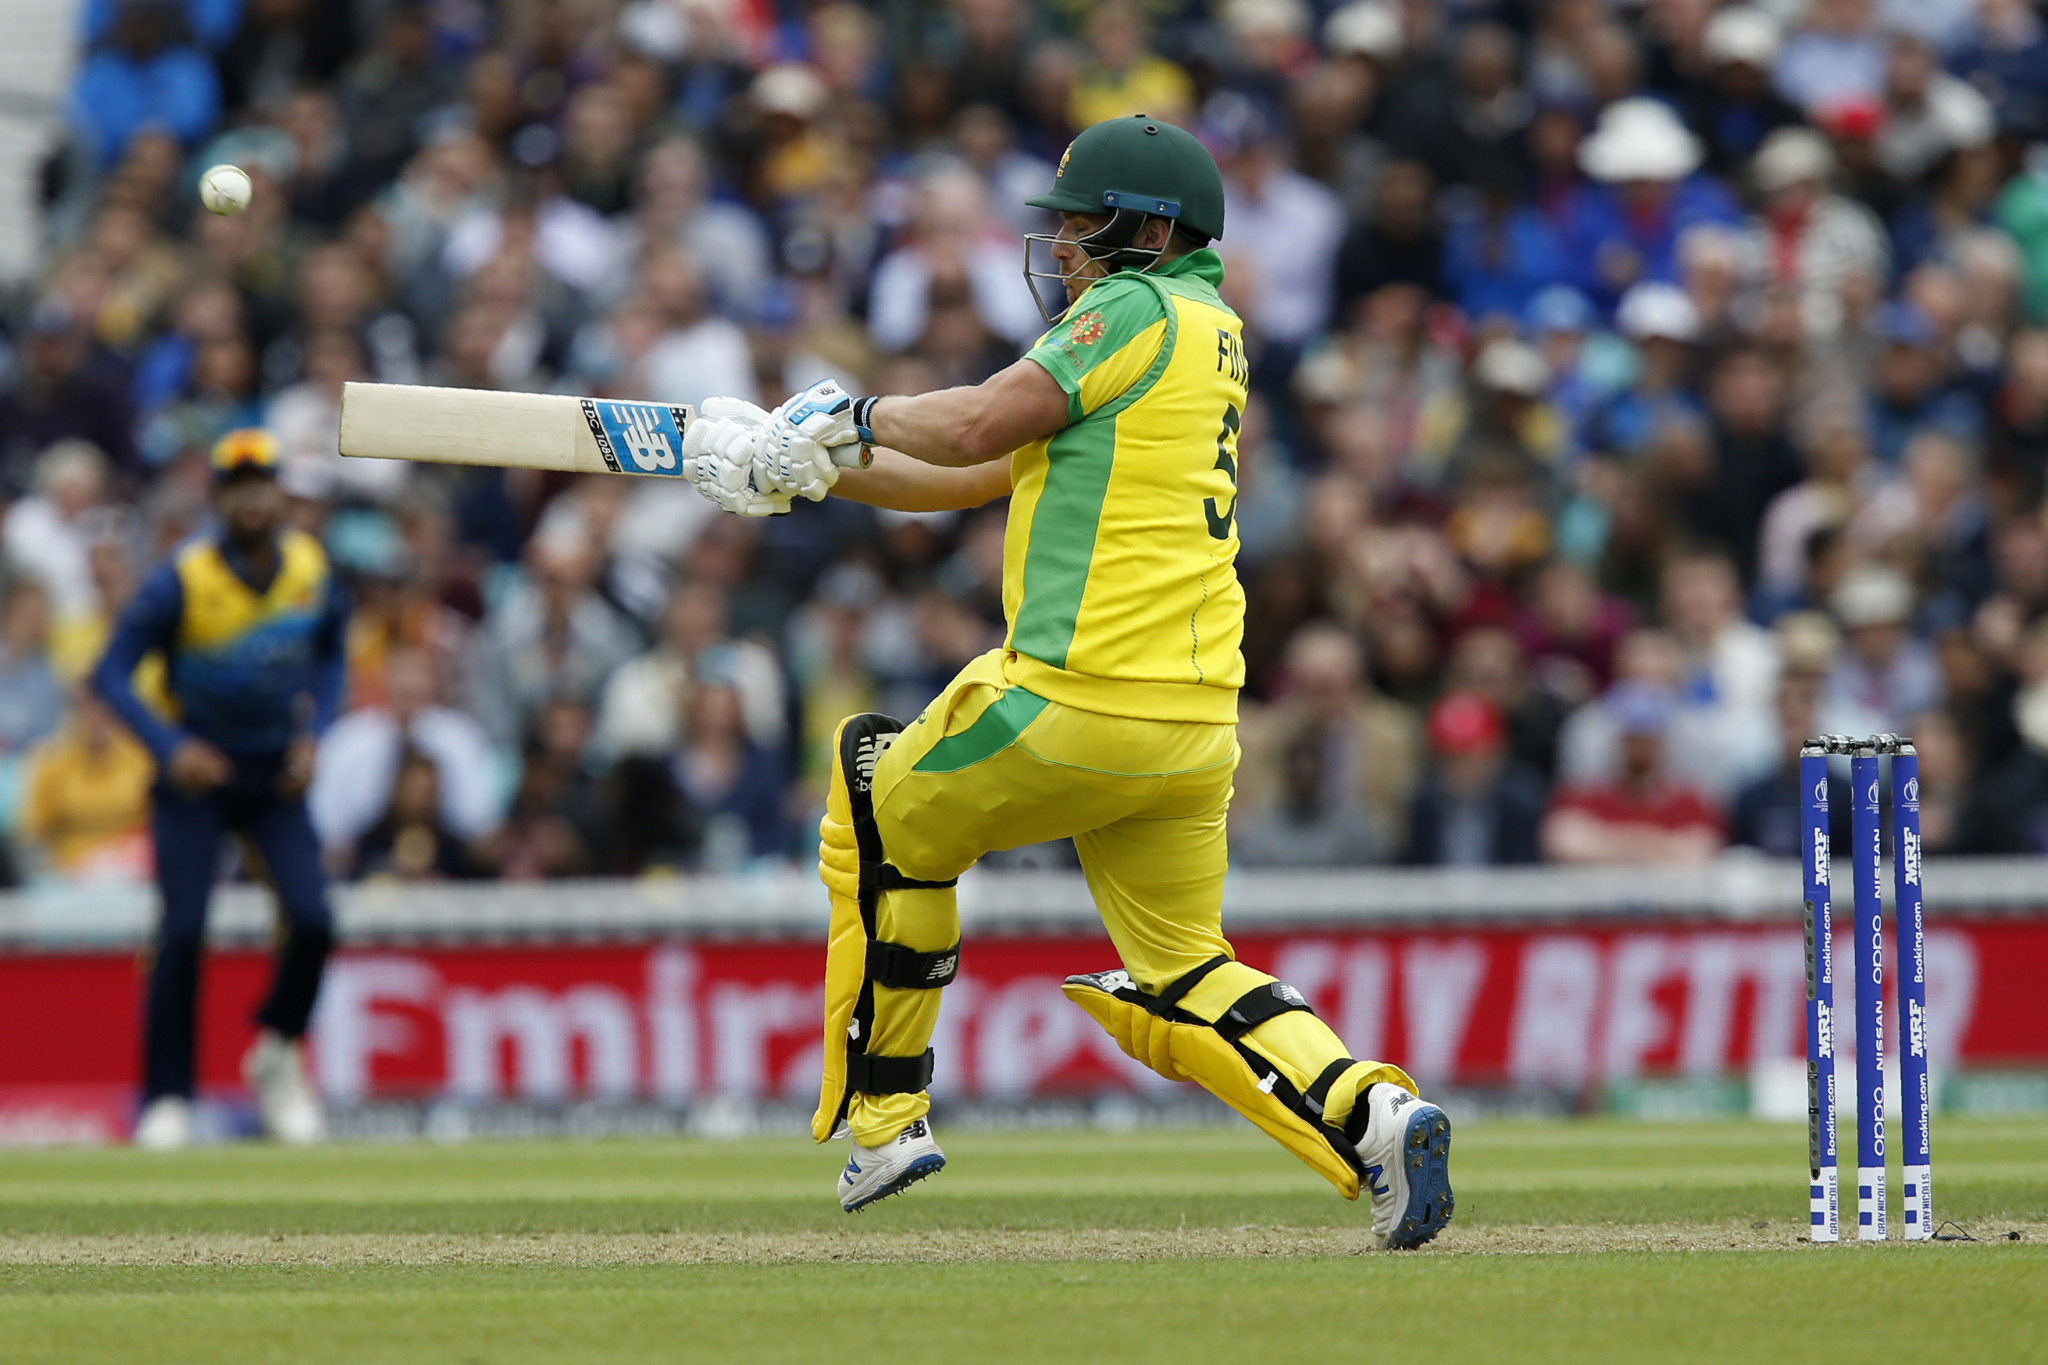 Finch and Starc guide defending champions Australia to victory over Sri Lanka at Cricket World Cup